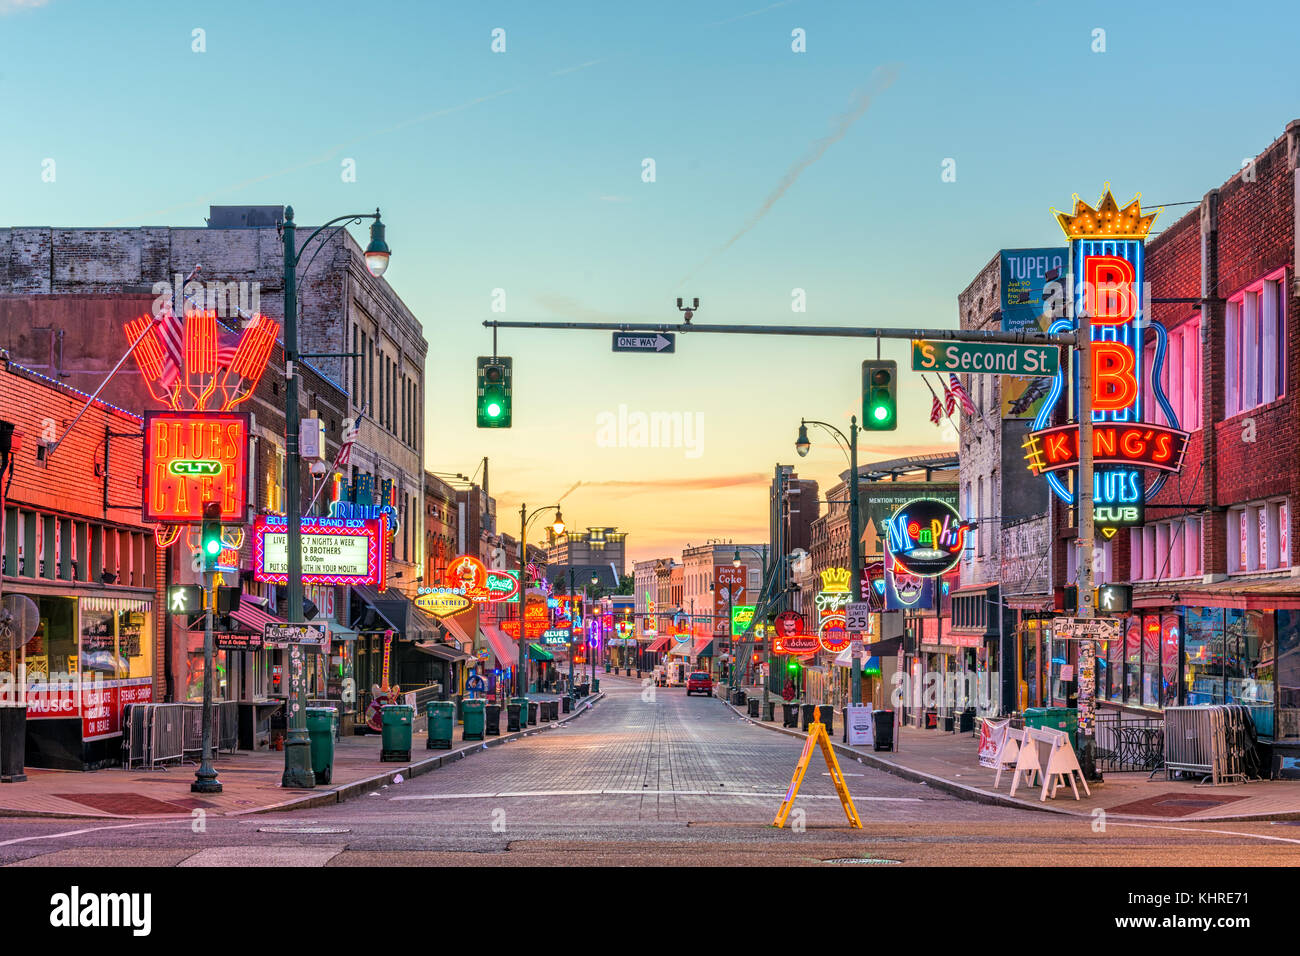 MEMPHIS, TENNESSEE - AUGUST 25, 2017: Blues Clubs on historic Beale Street at twilight. Stock Photo